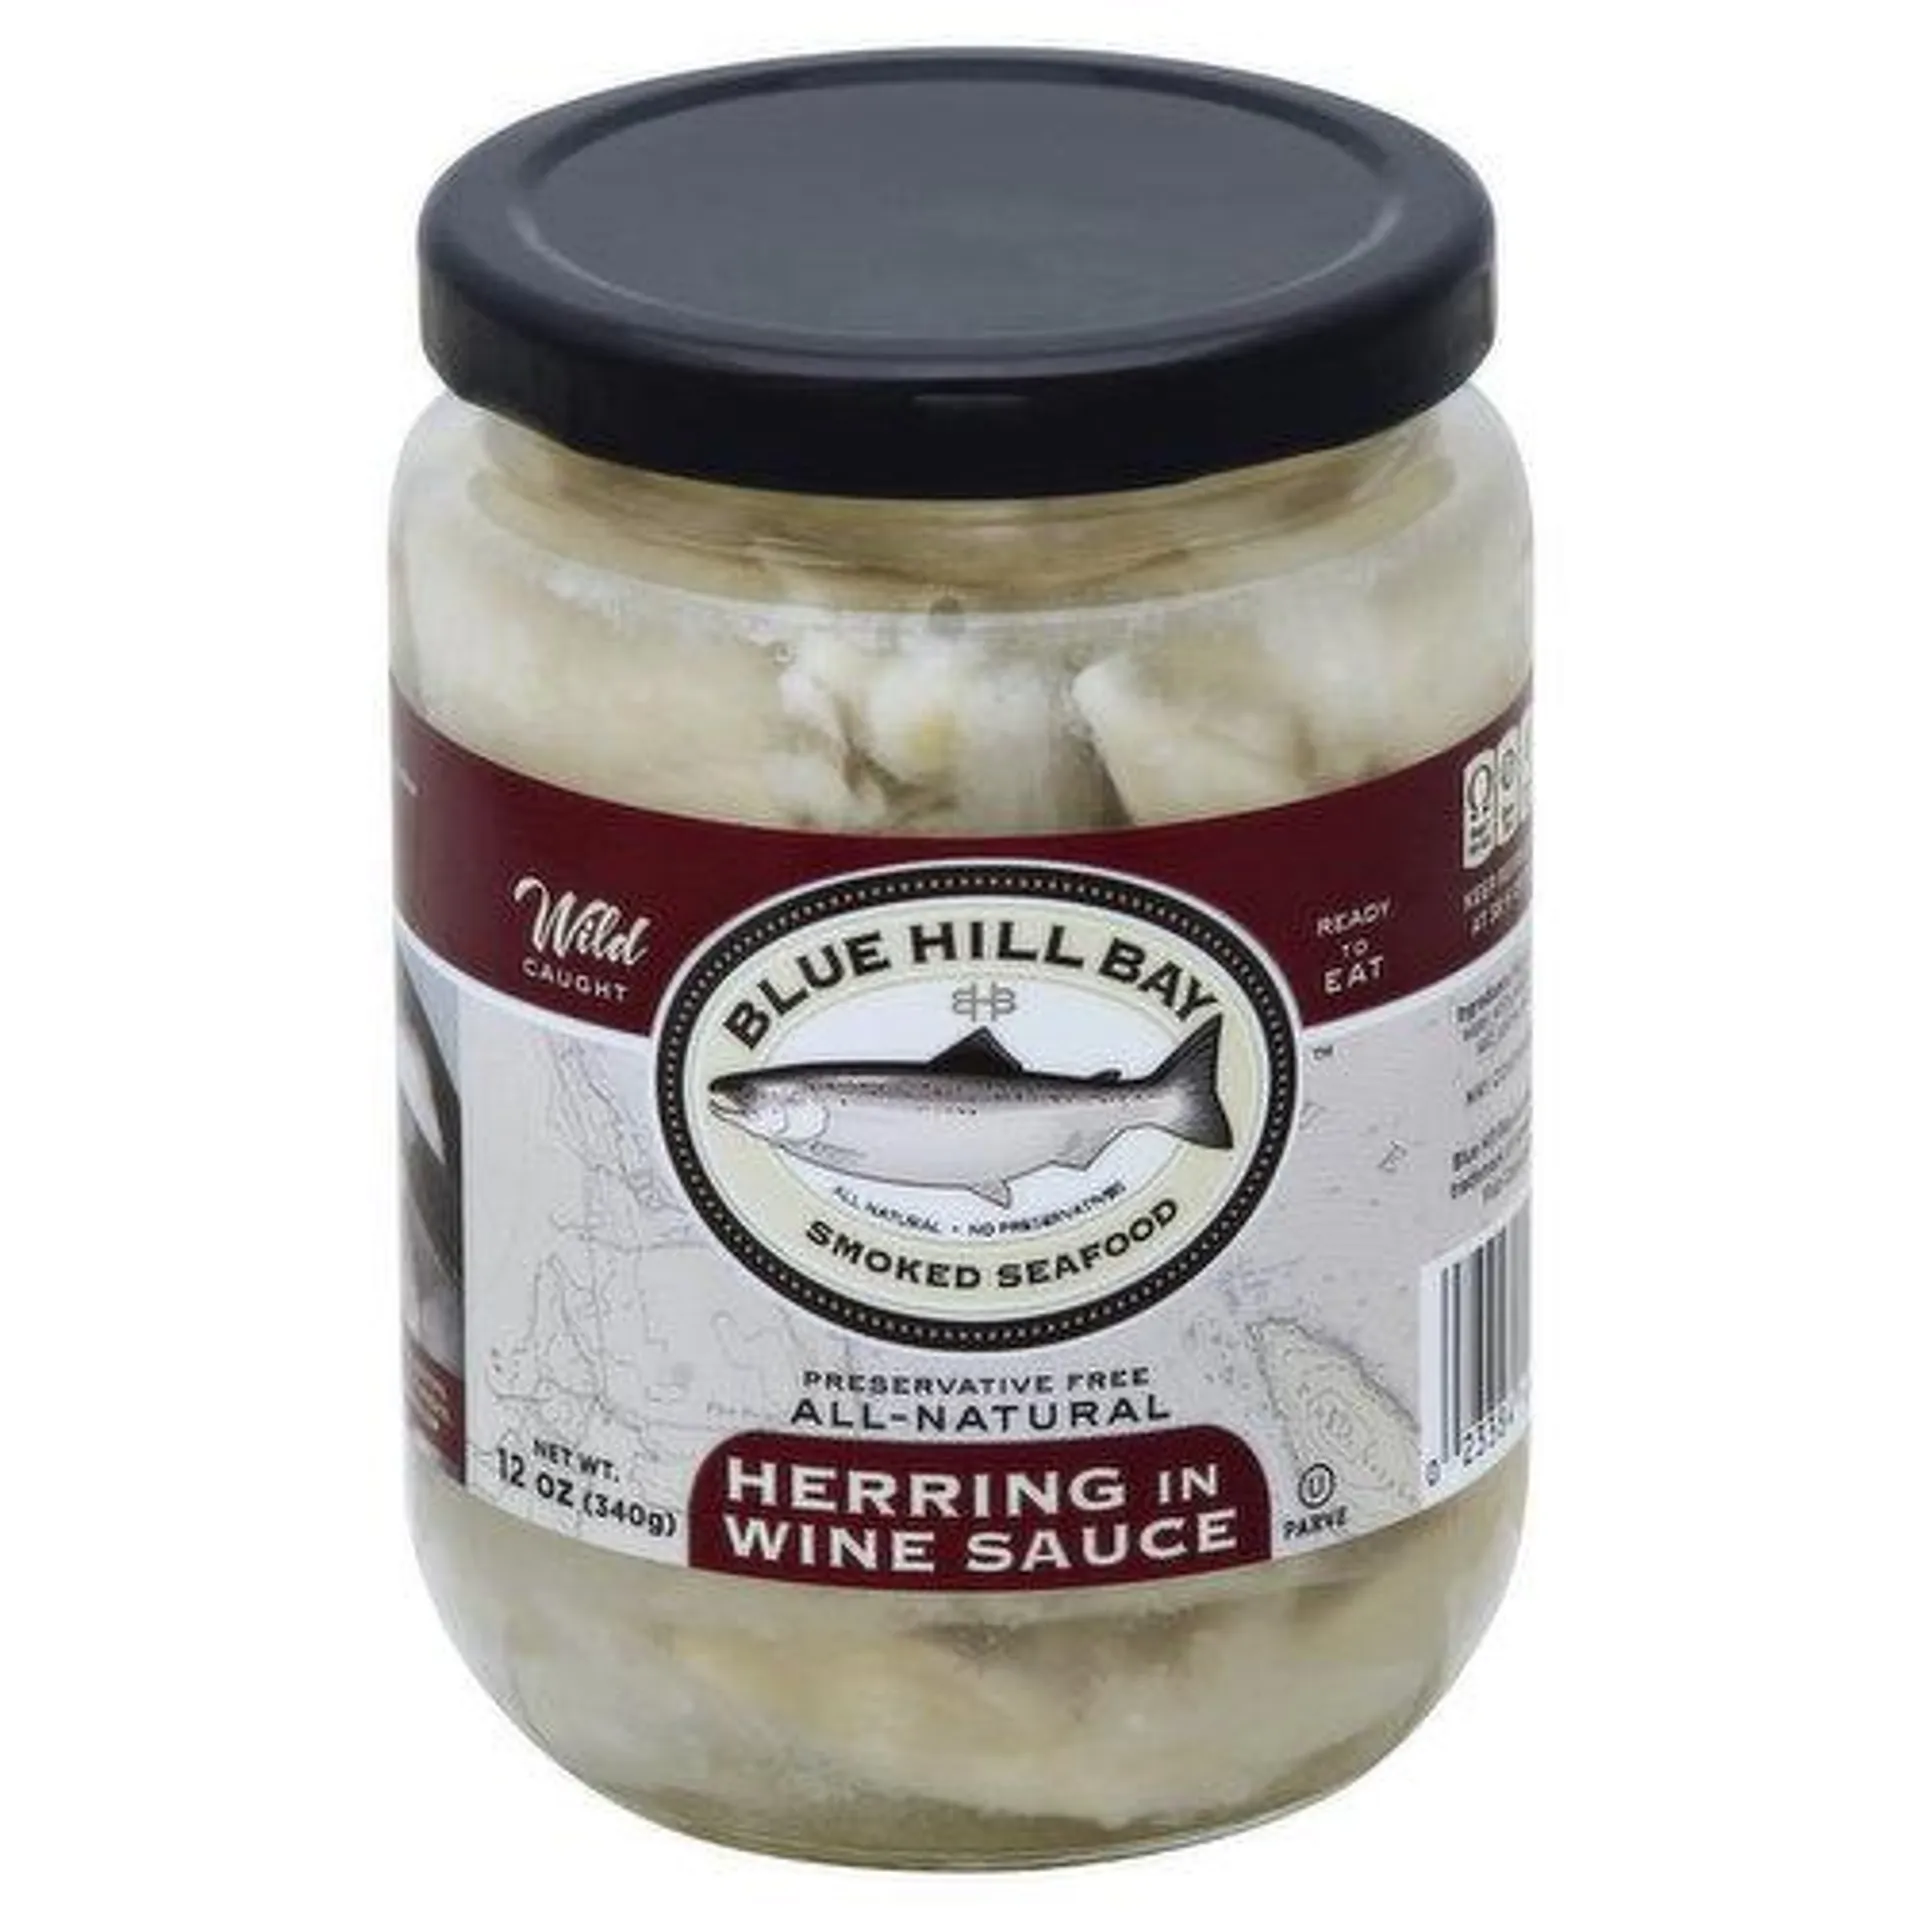 Blue Hill Bay Herring, in Wine Sauce - 12 Ounce